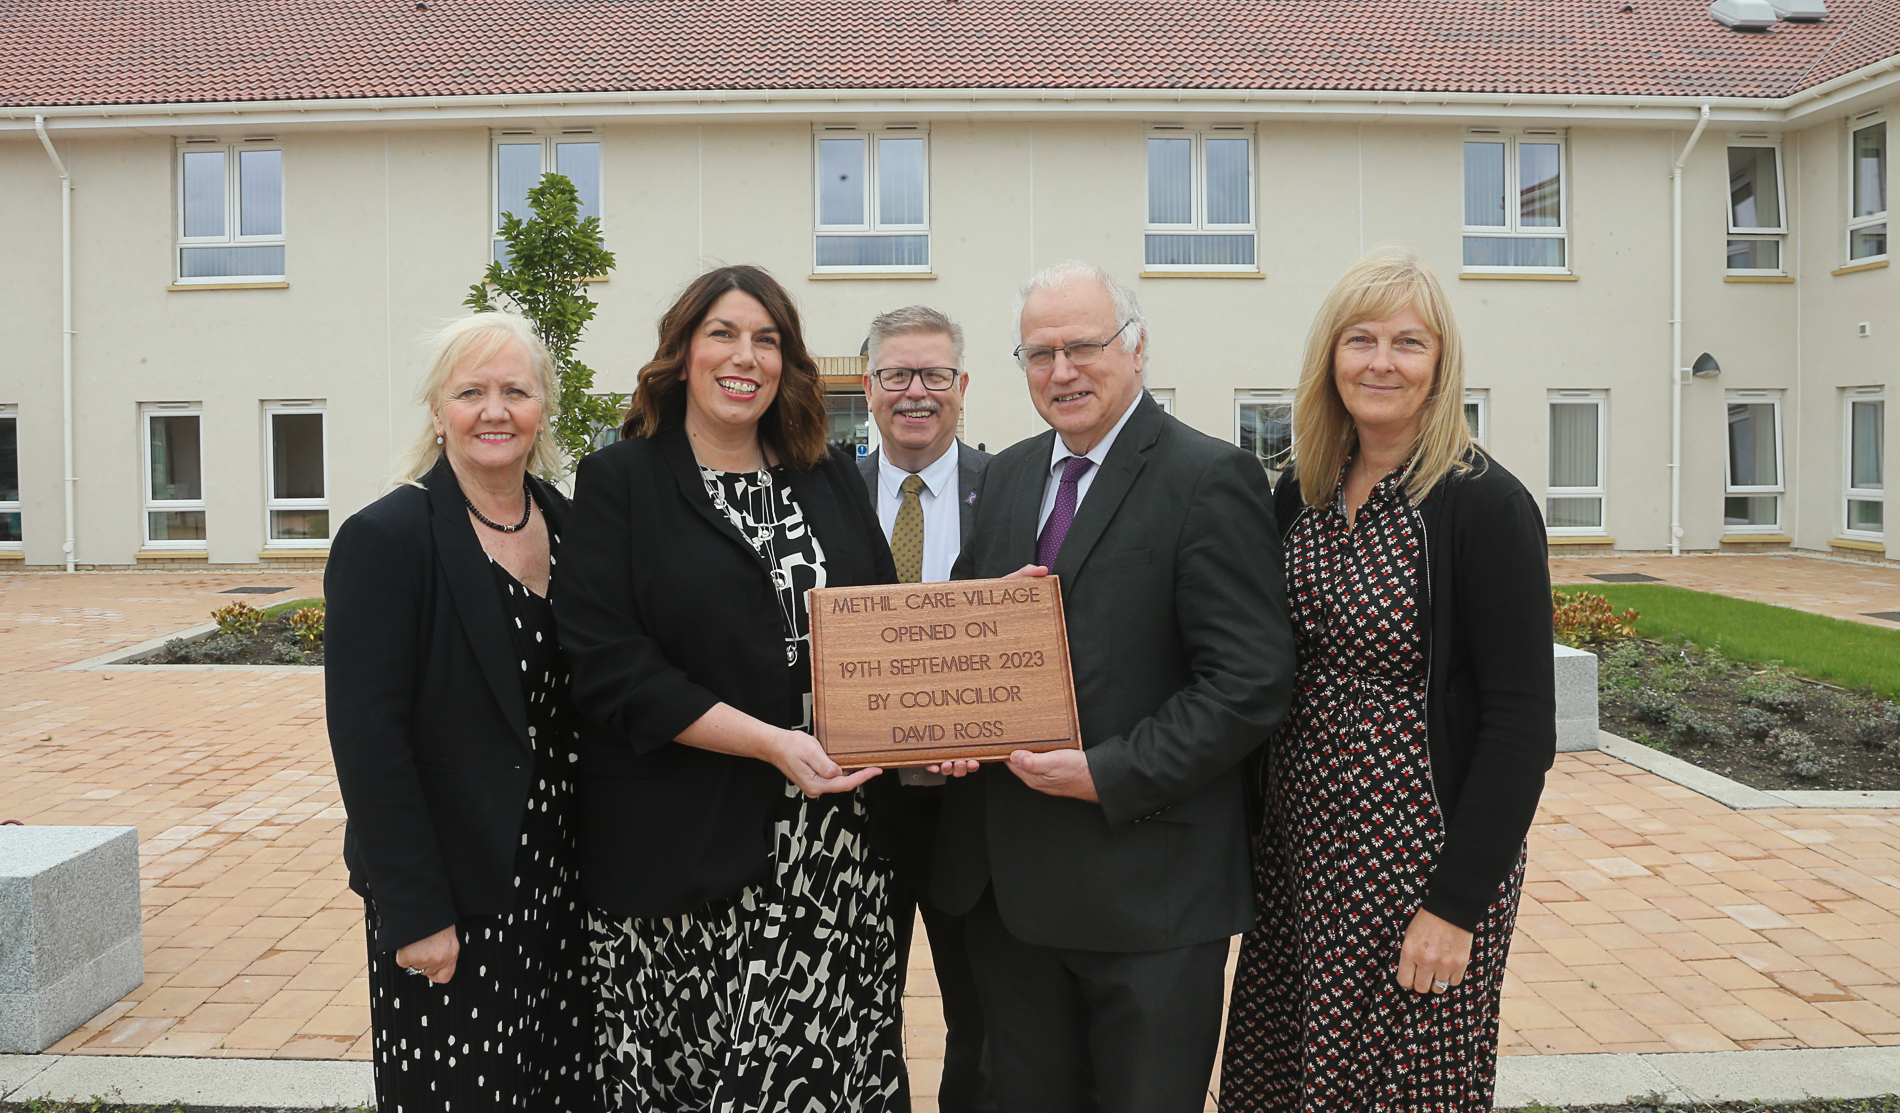 Community celebrates opening of Fife’s first care village